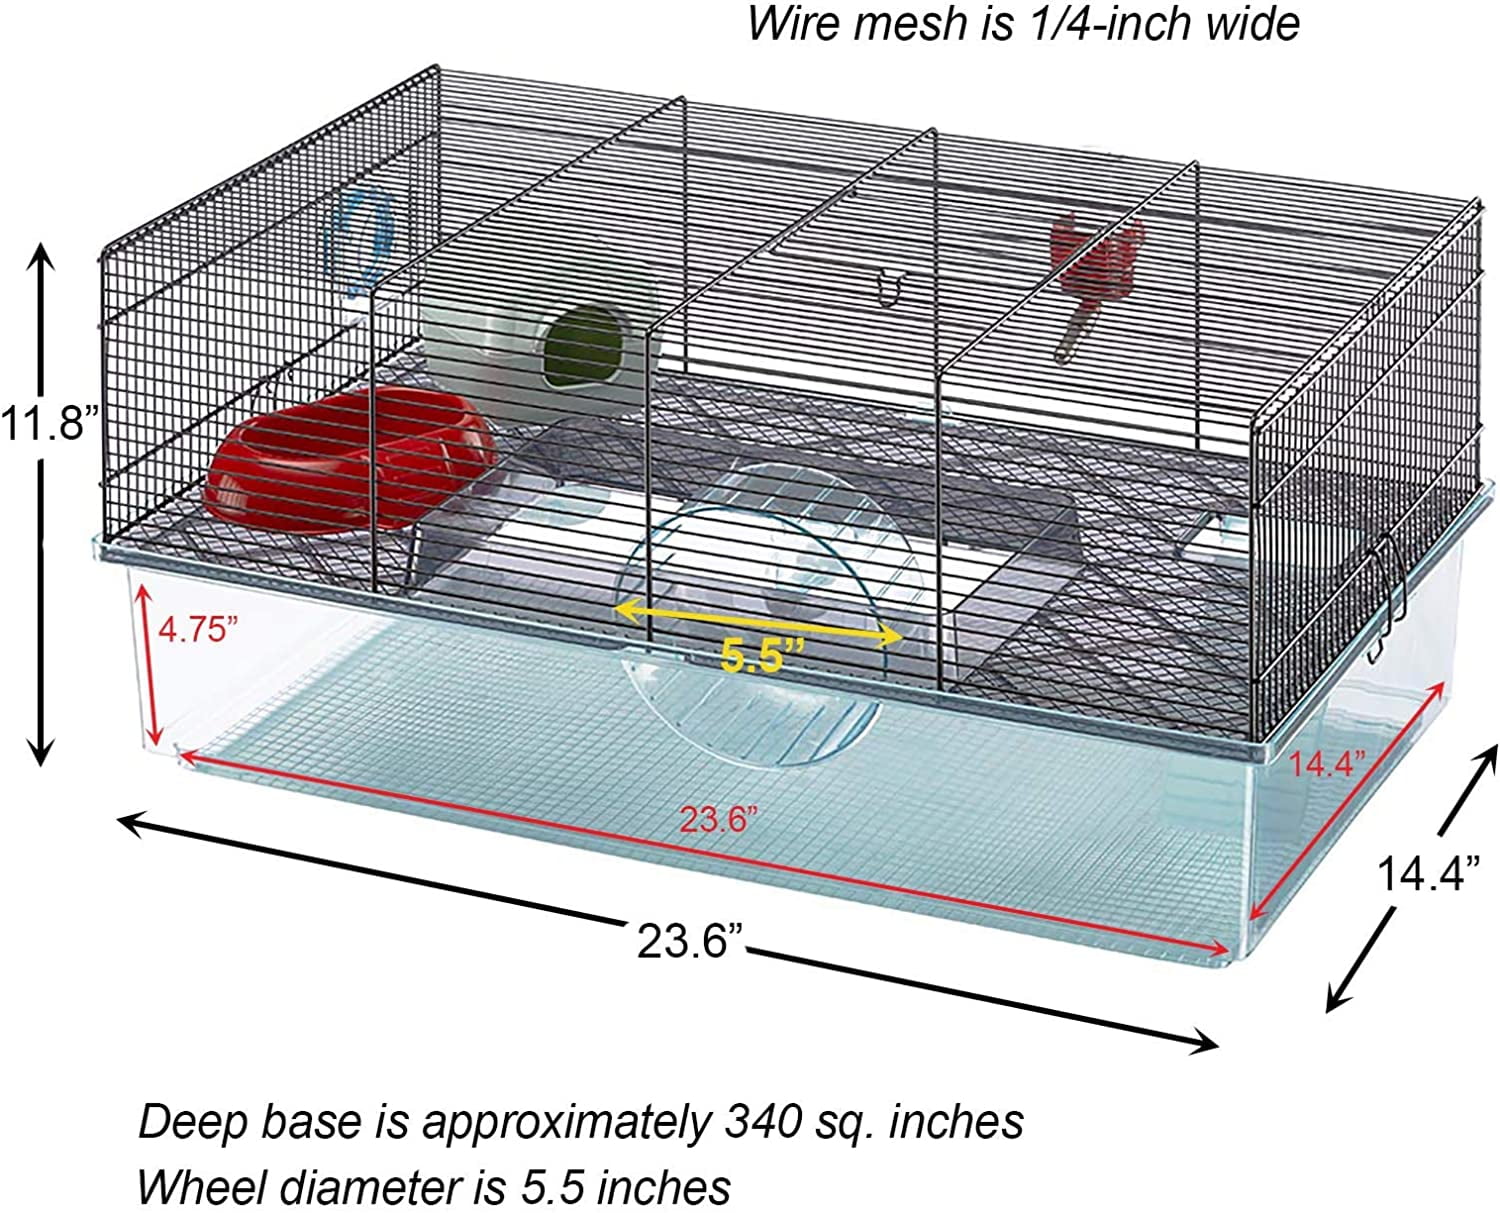 procedure Vooroordeel pop Favola Hamster Cage Includes Free Water Bottle, Exercise Wheel, Food Dish &  Hamster Hide-Out Large Hamster Cage Measures 23.6L x 14.4W x 11.8H-Inches &  Includes 1-Year Manufacturer's Warranty - Walmart.com